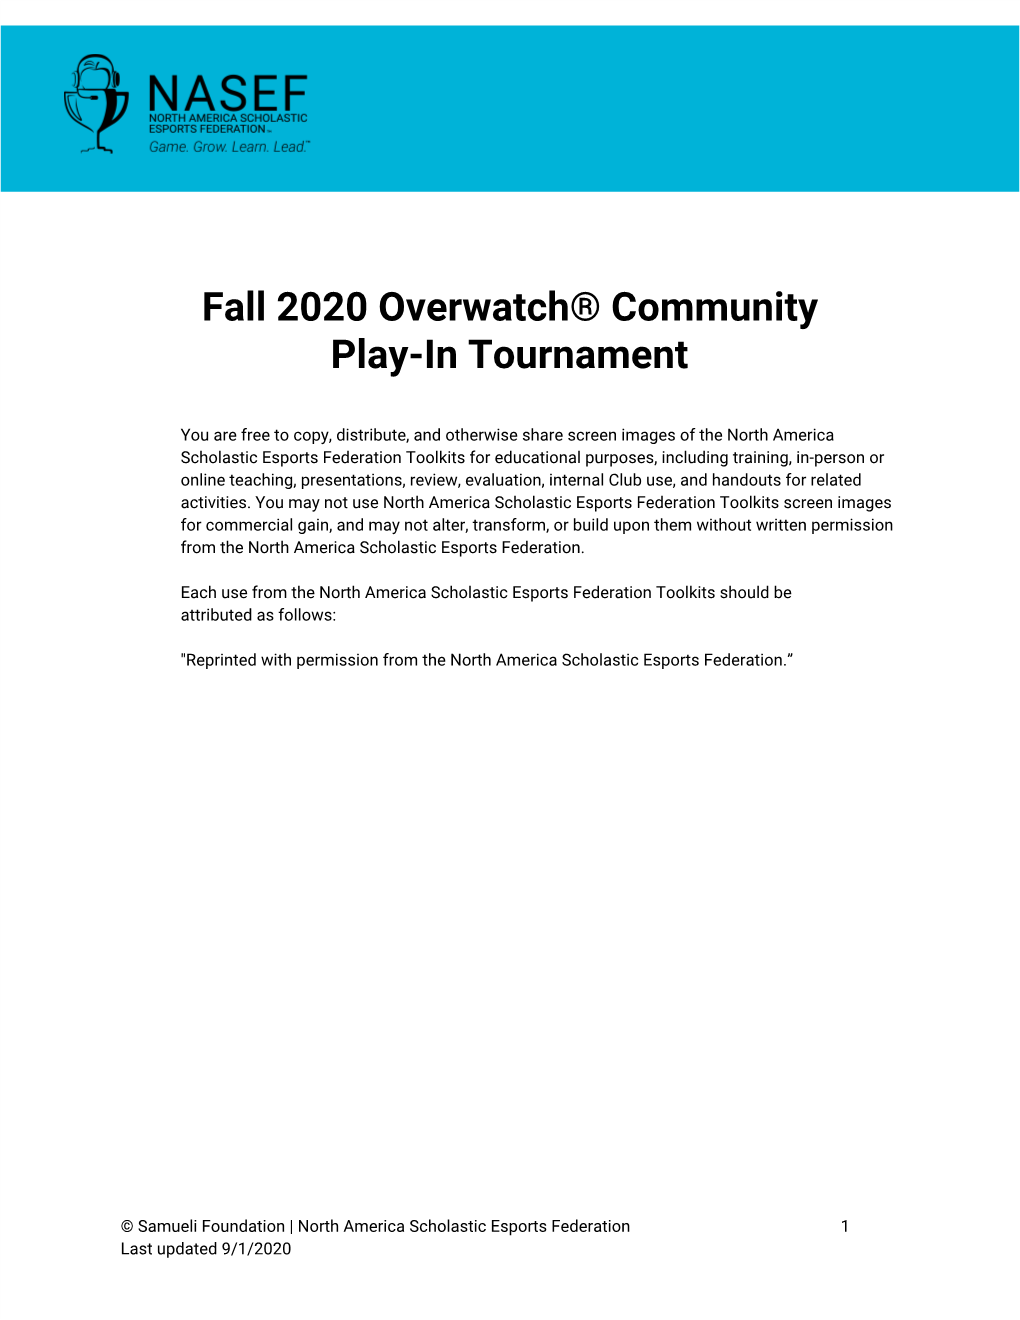 Fall 2020 Overwatch® Community Play-In Tournament